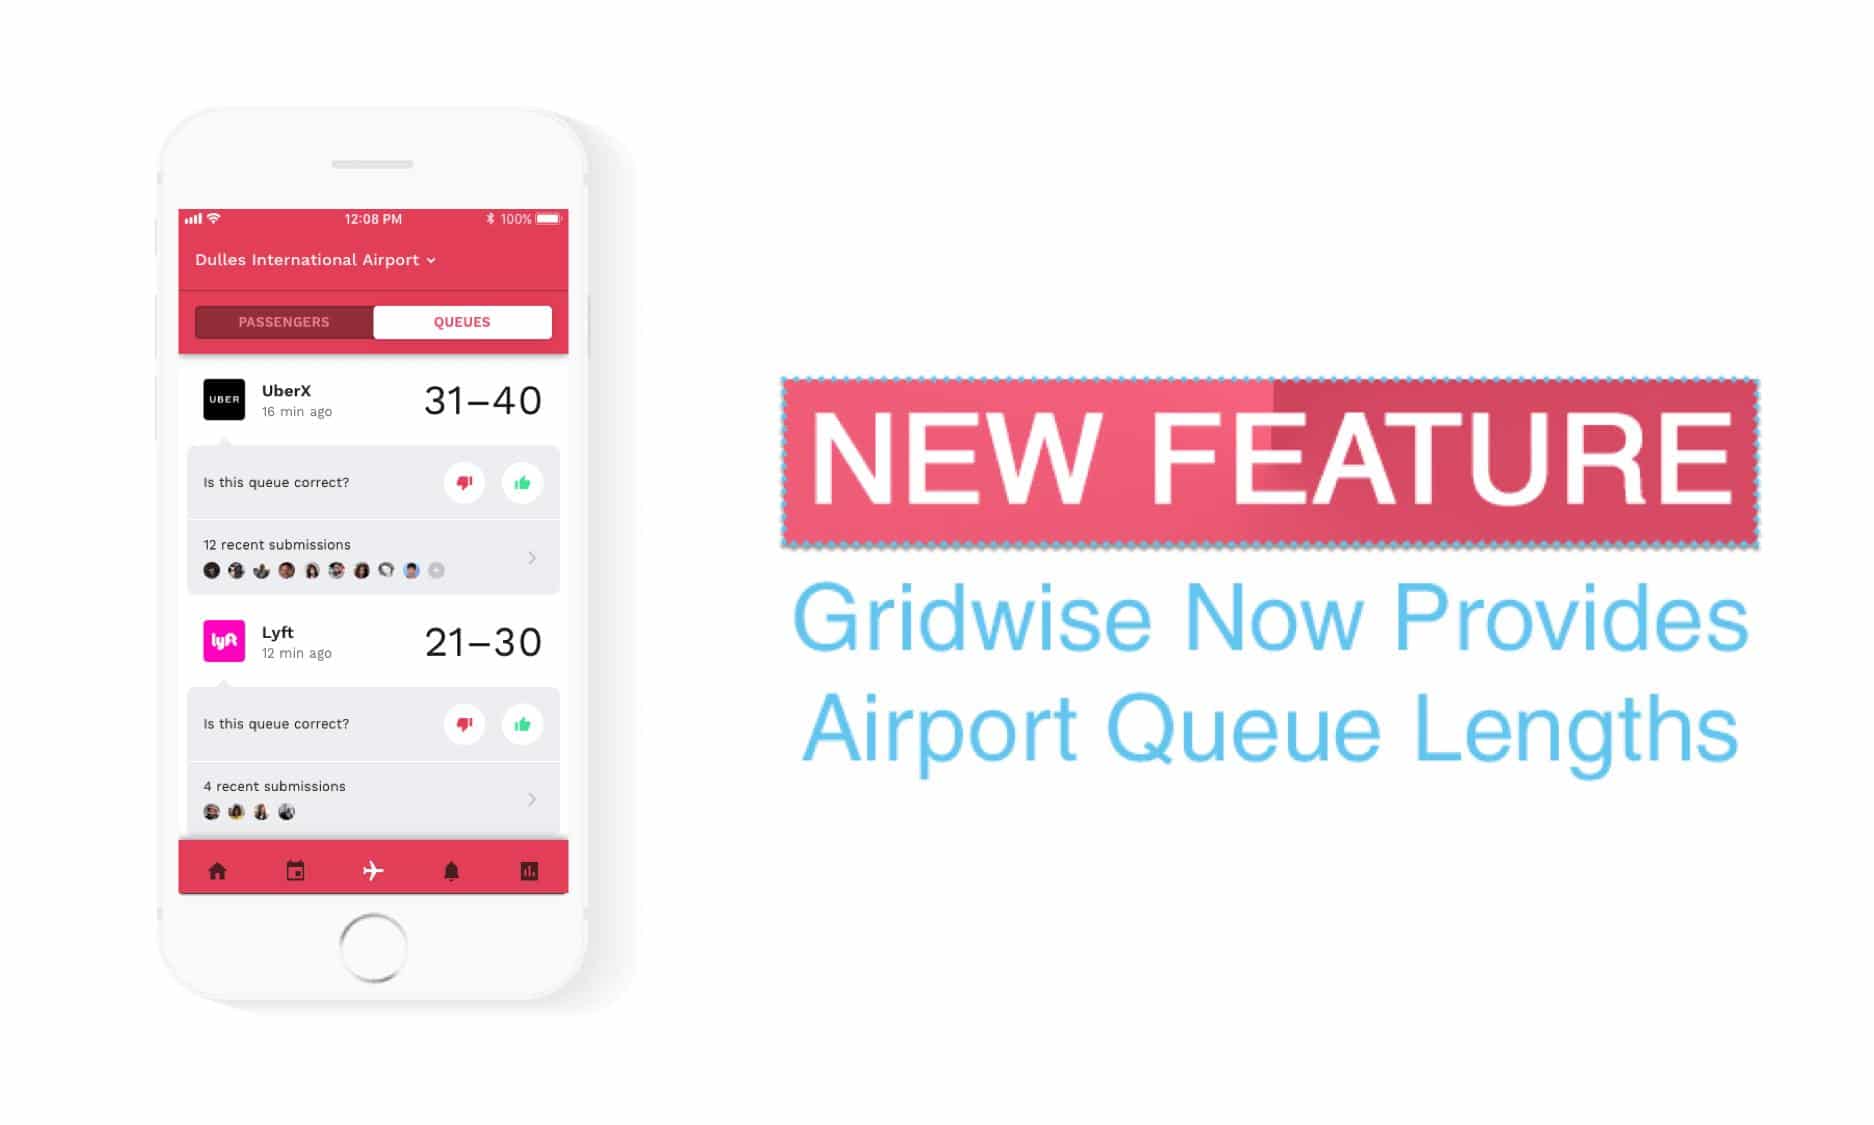 Spend Less Time Waiting in Airport Queues - Gridwise Now Provides Airport Queue Lengths